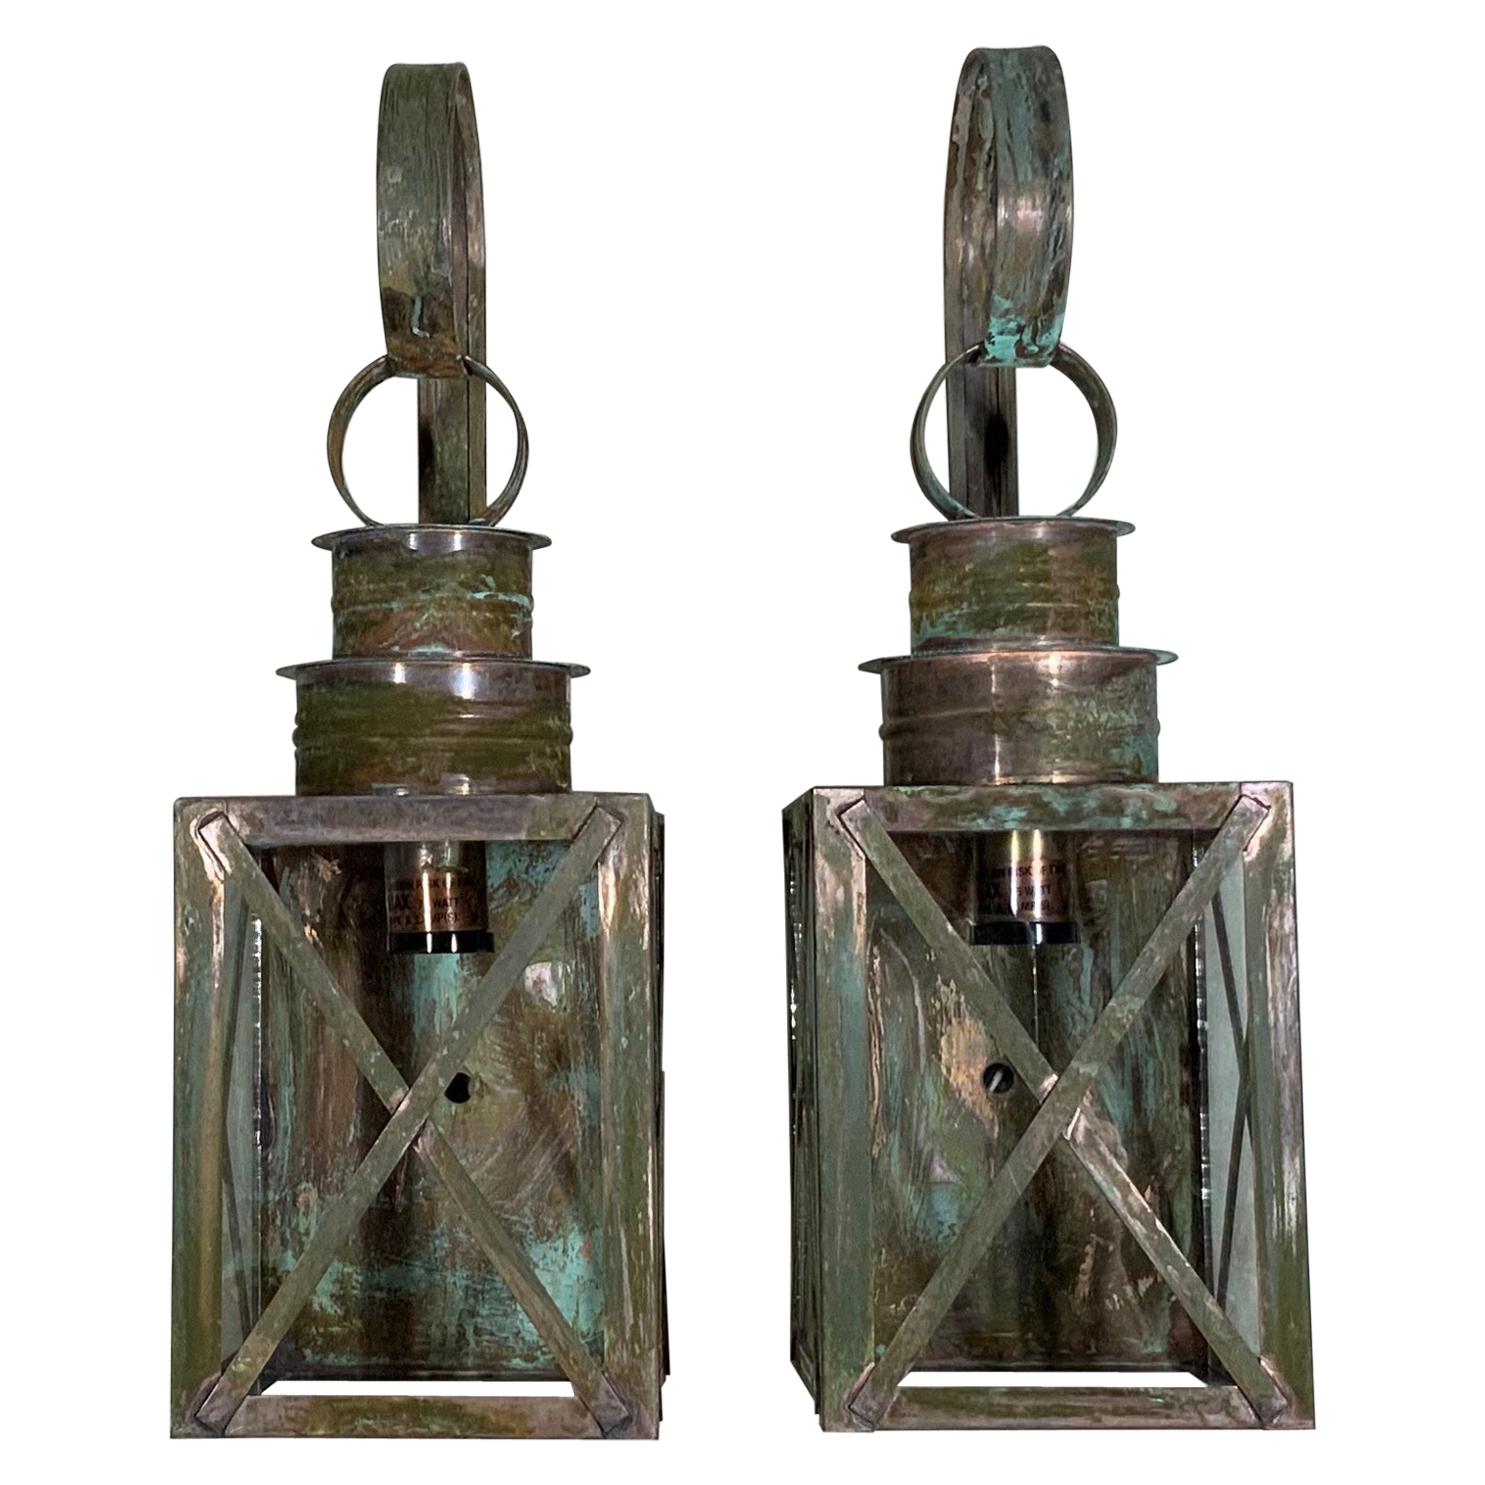 Pair of Architectural Wall Hanging Copper Lantern